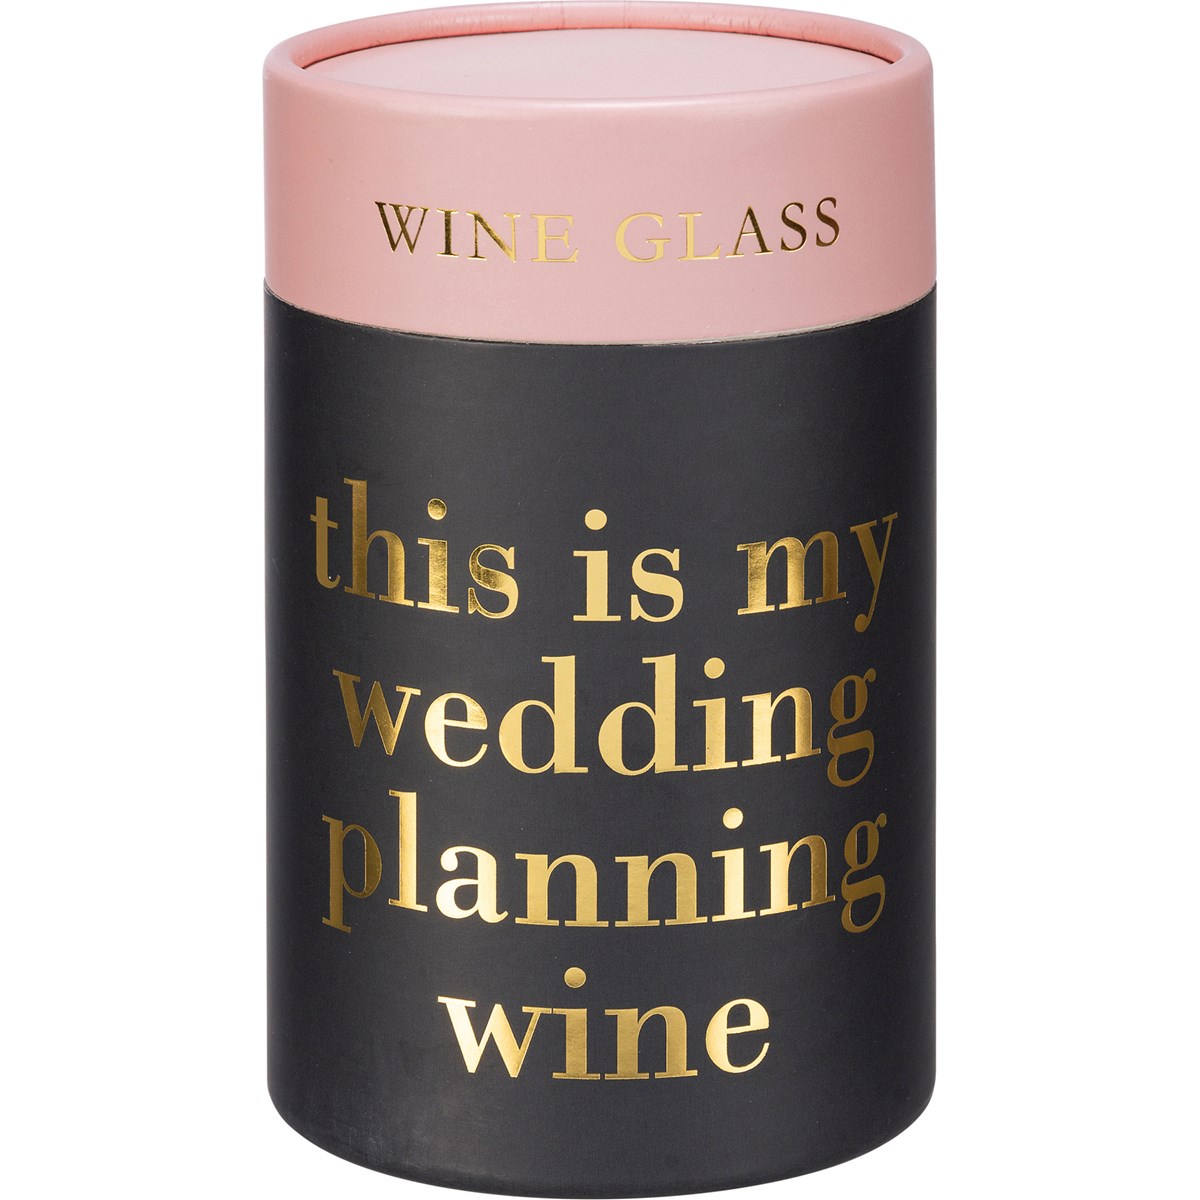 This Is My Wedding Planning Wine Wine Glass - Glass